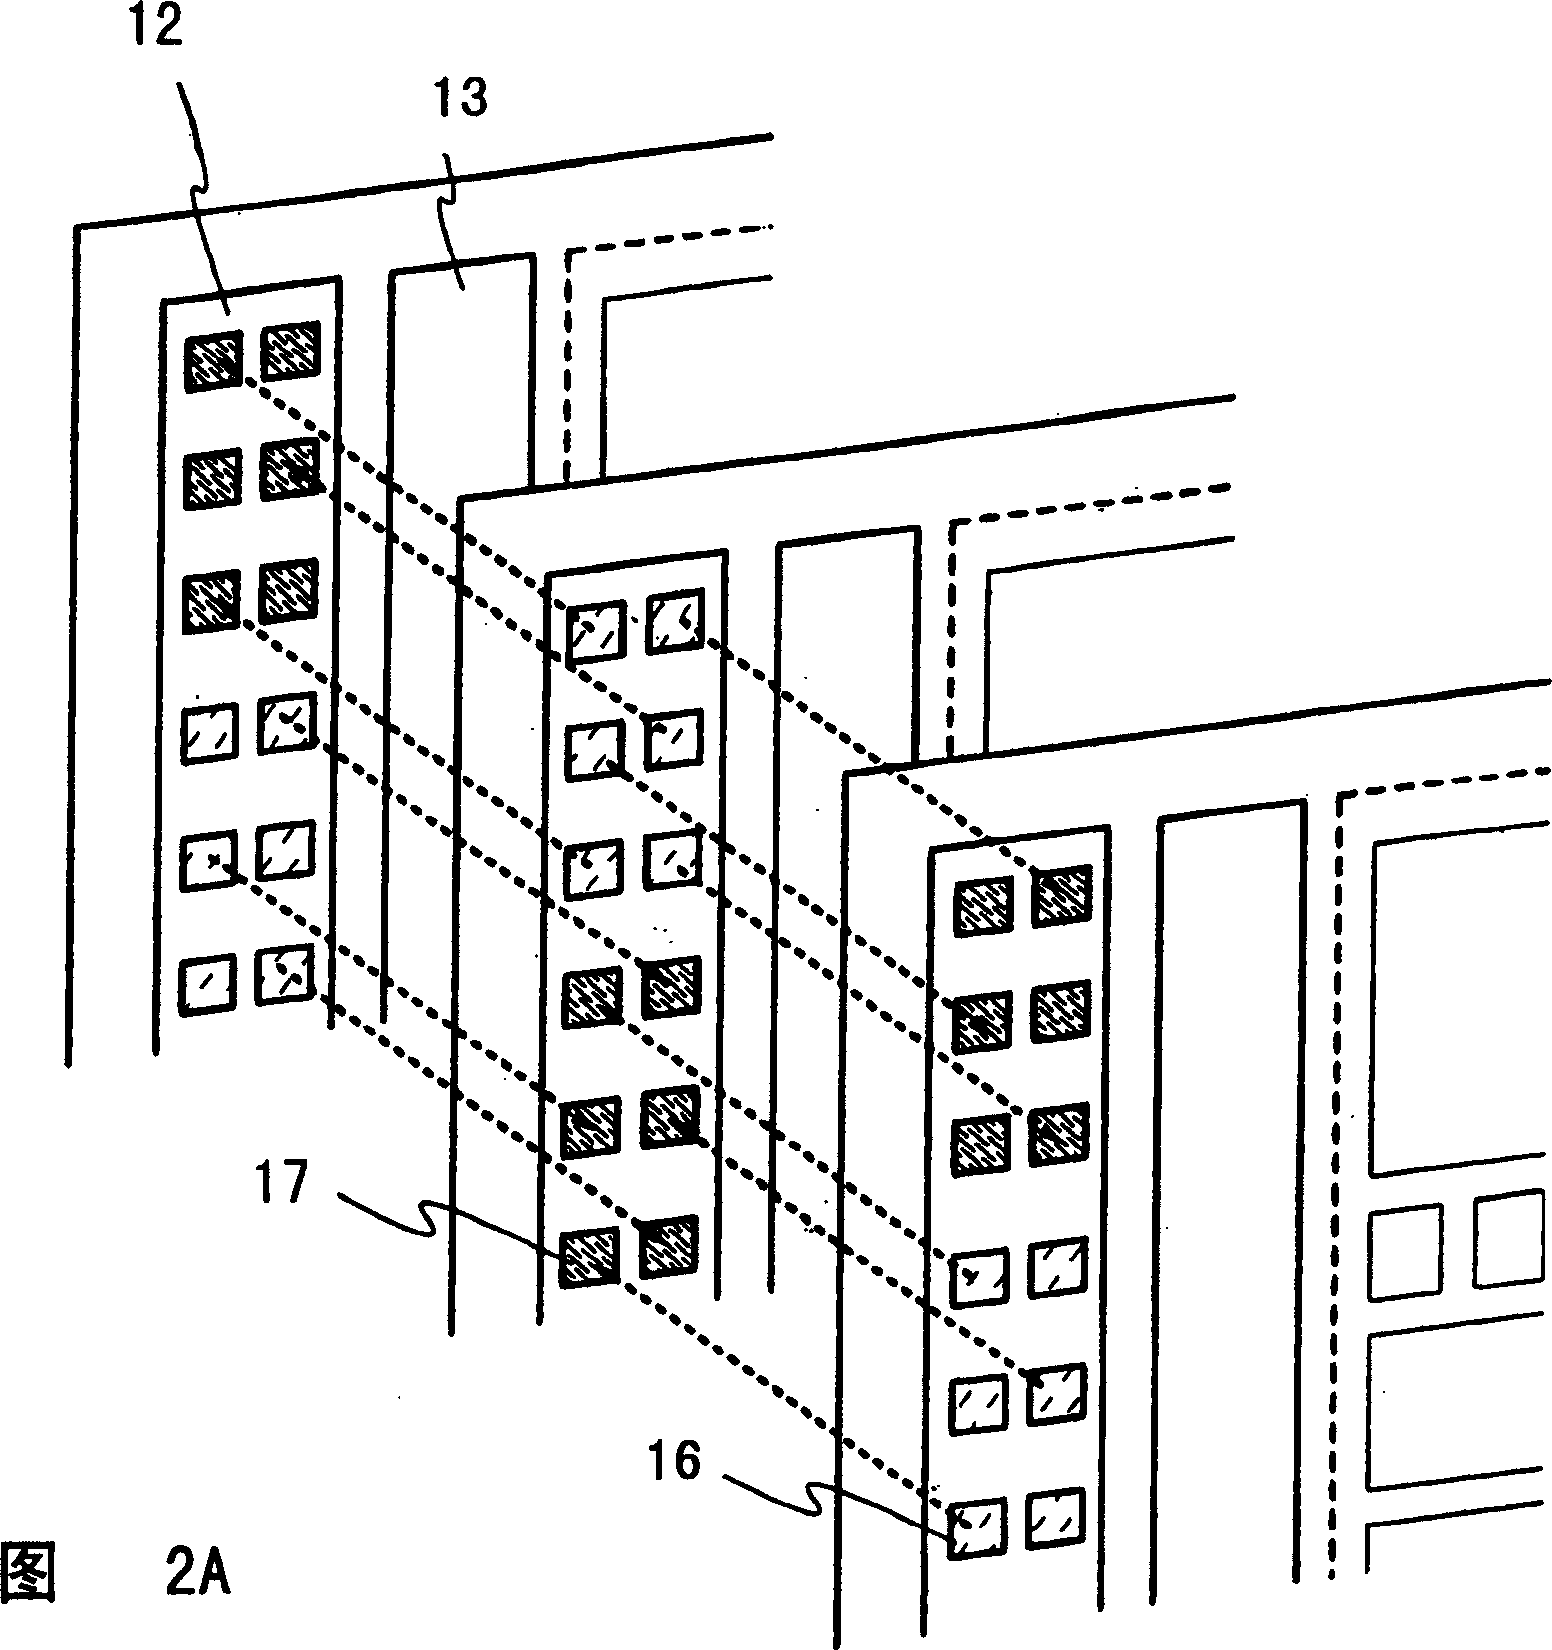 Semiconductor device and microprocessor